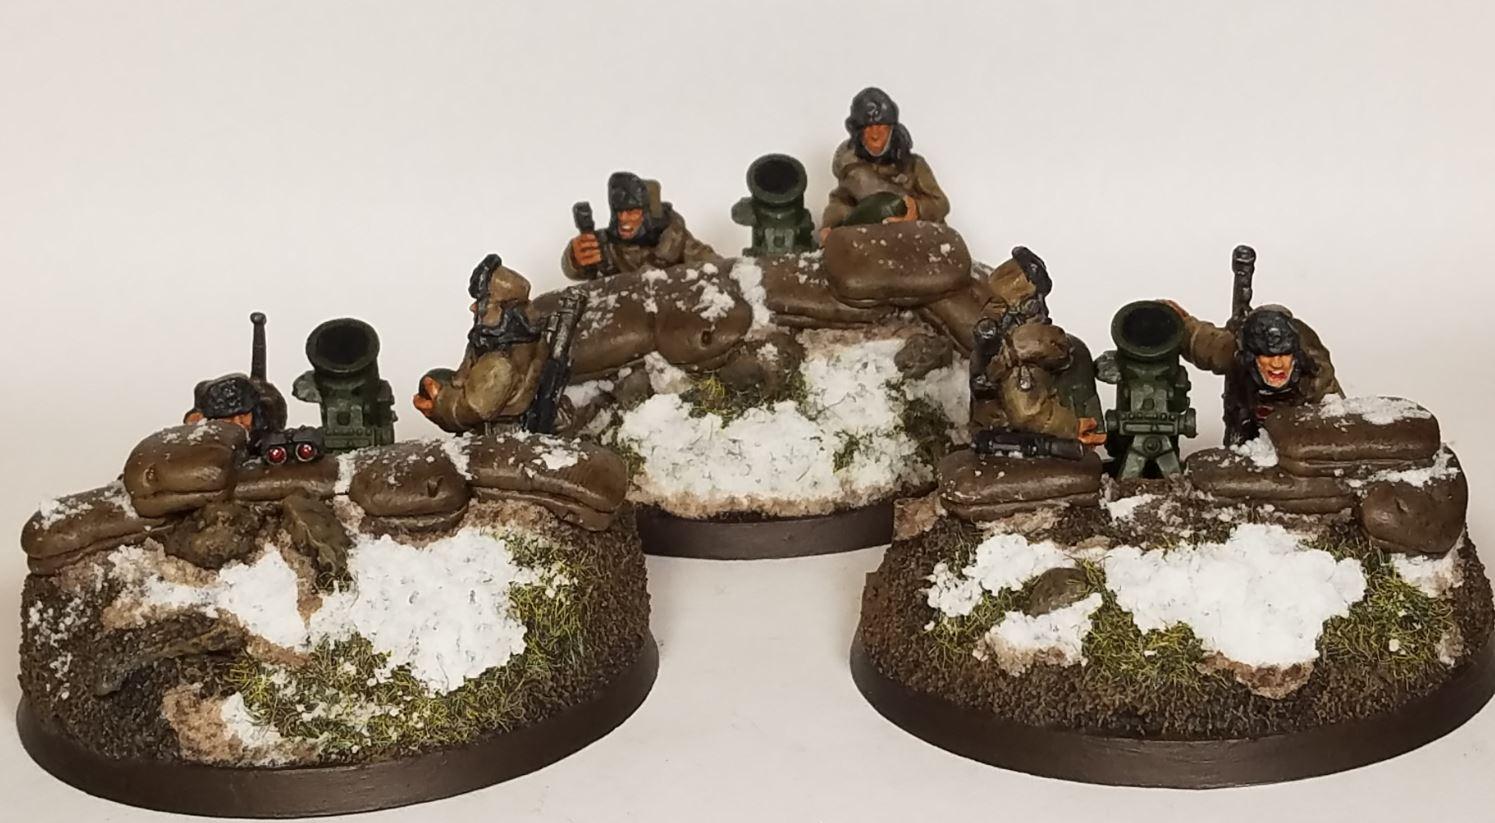 2nd Edition, Astra Militarum, Heavy Weapon Squad, Ice Warriors Of Valhalla, Ice Warriors Of Valhallan, Imperial Guard, Mortars, Valhallans